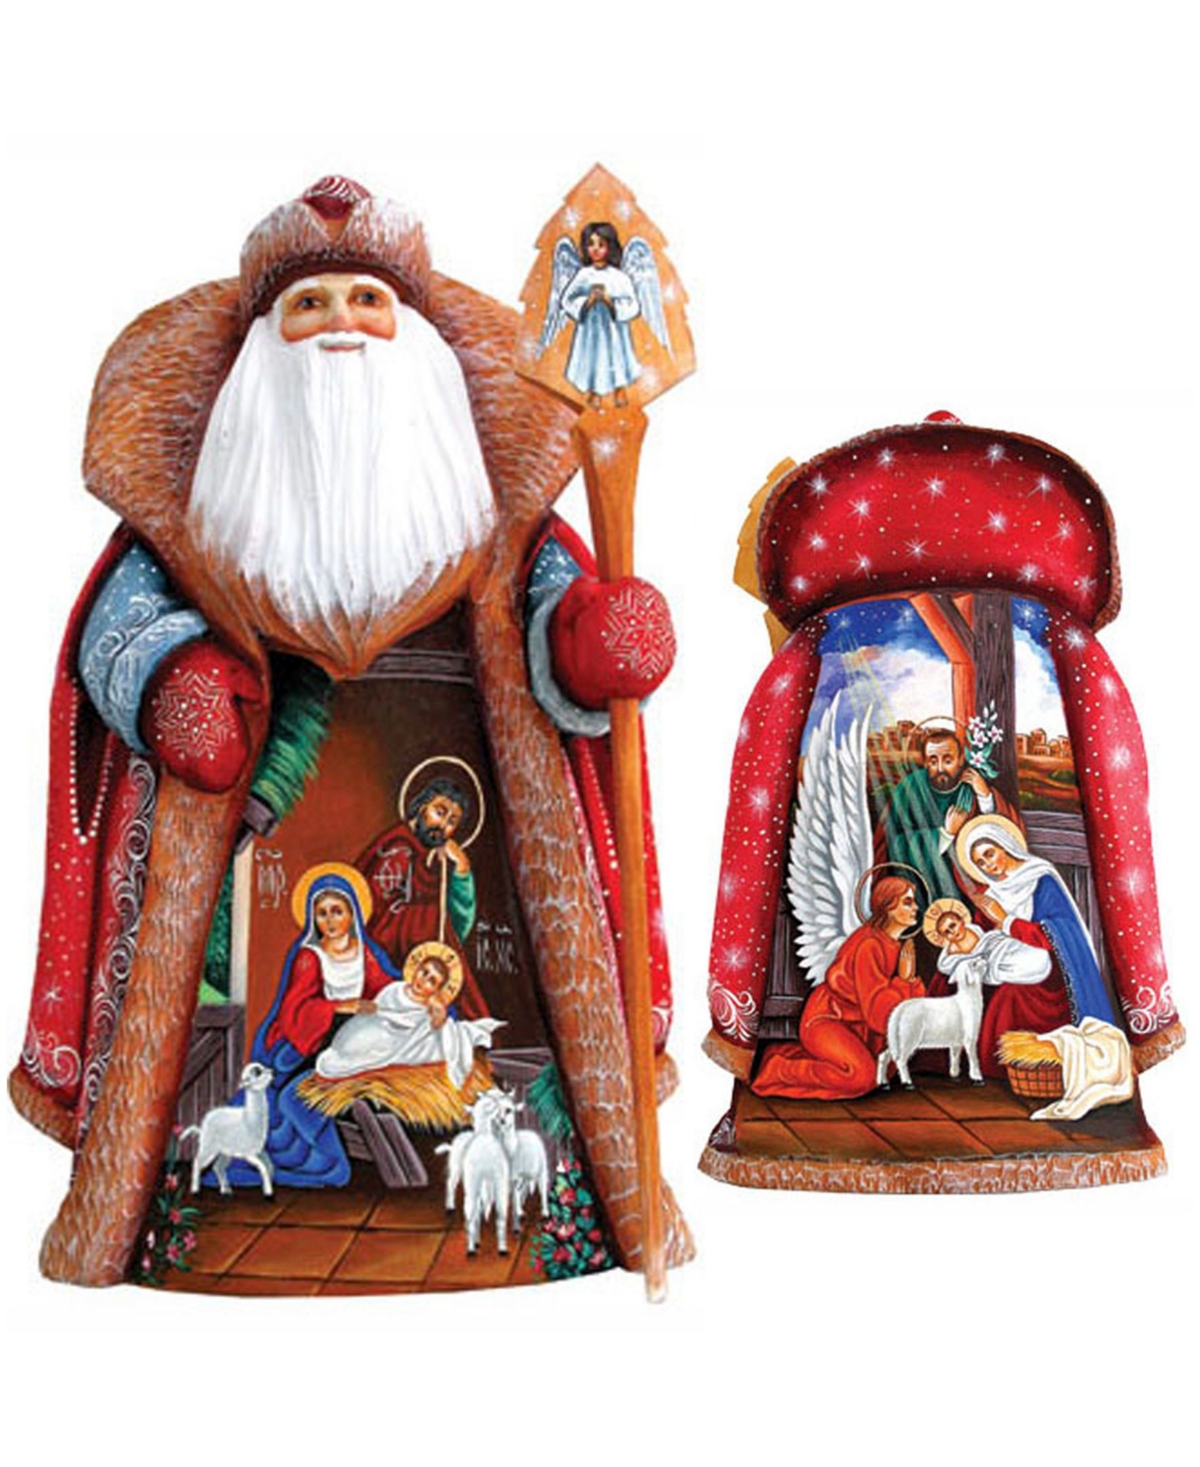 Woodcarved and Hand Painted Message of Faith Santa Figurine - Multi